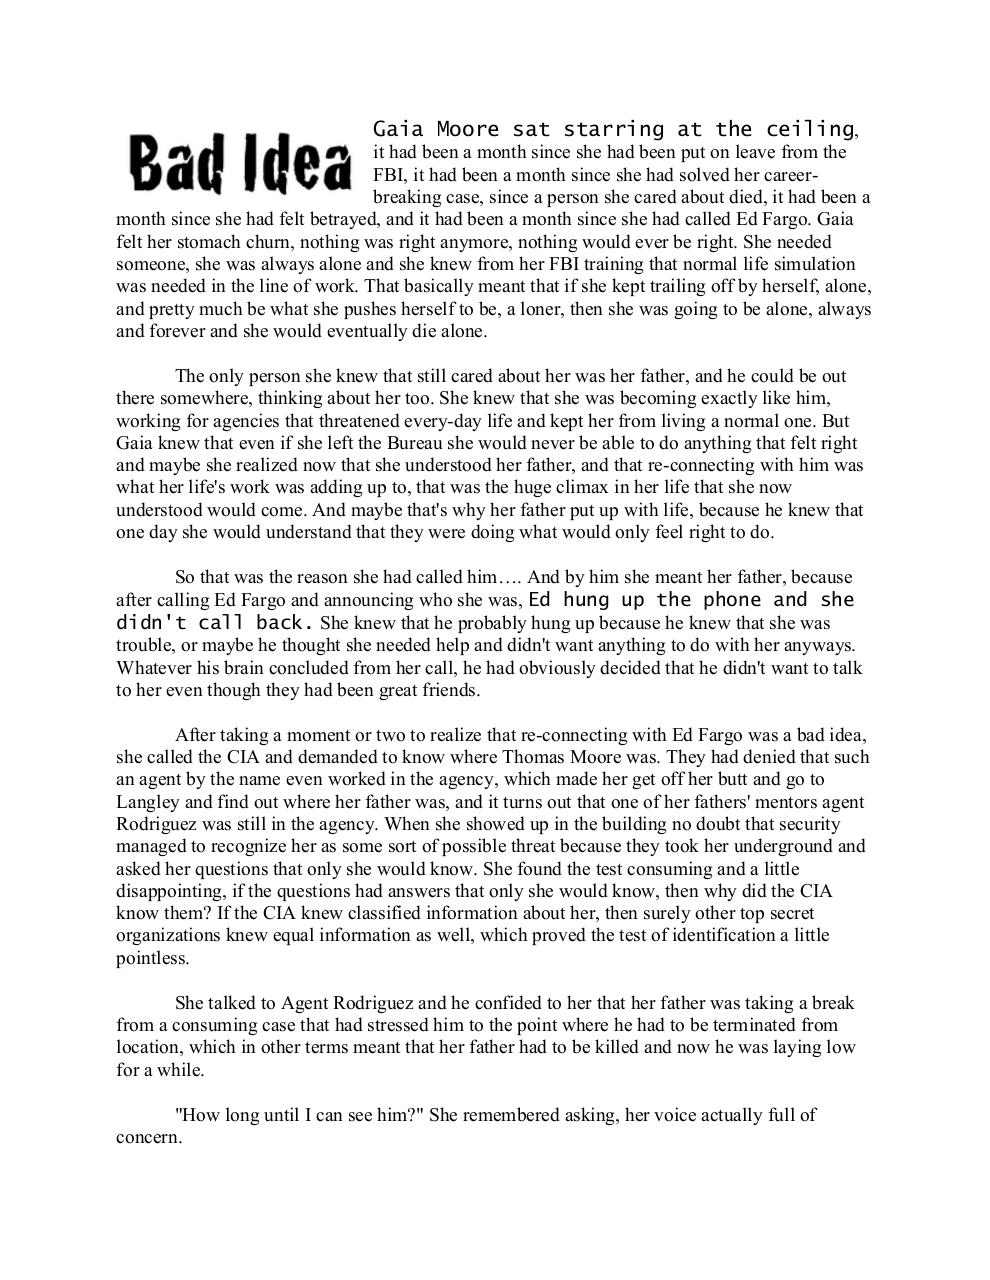 Chapter 1 - The Gaia Moore Call.pdf - page 2/7